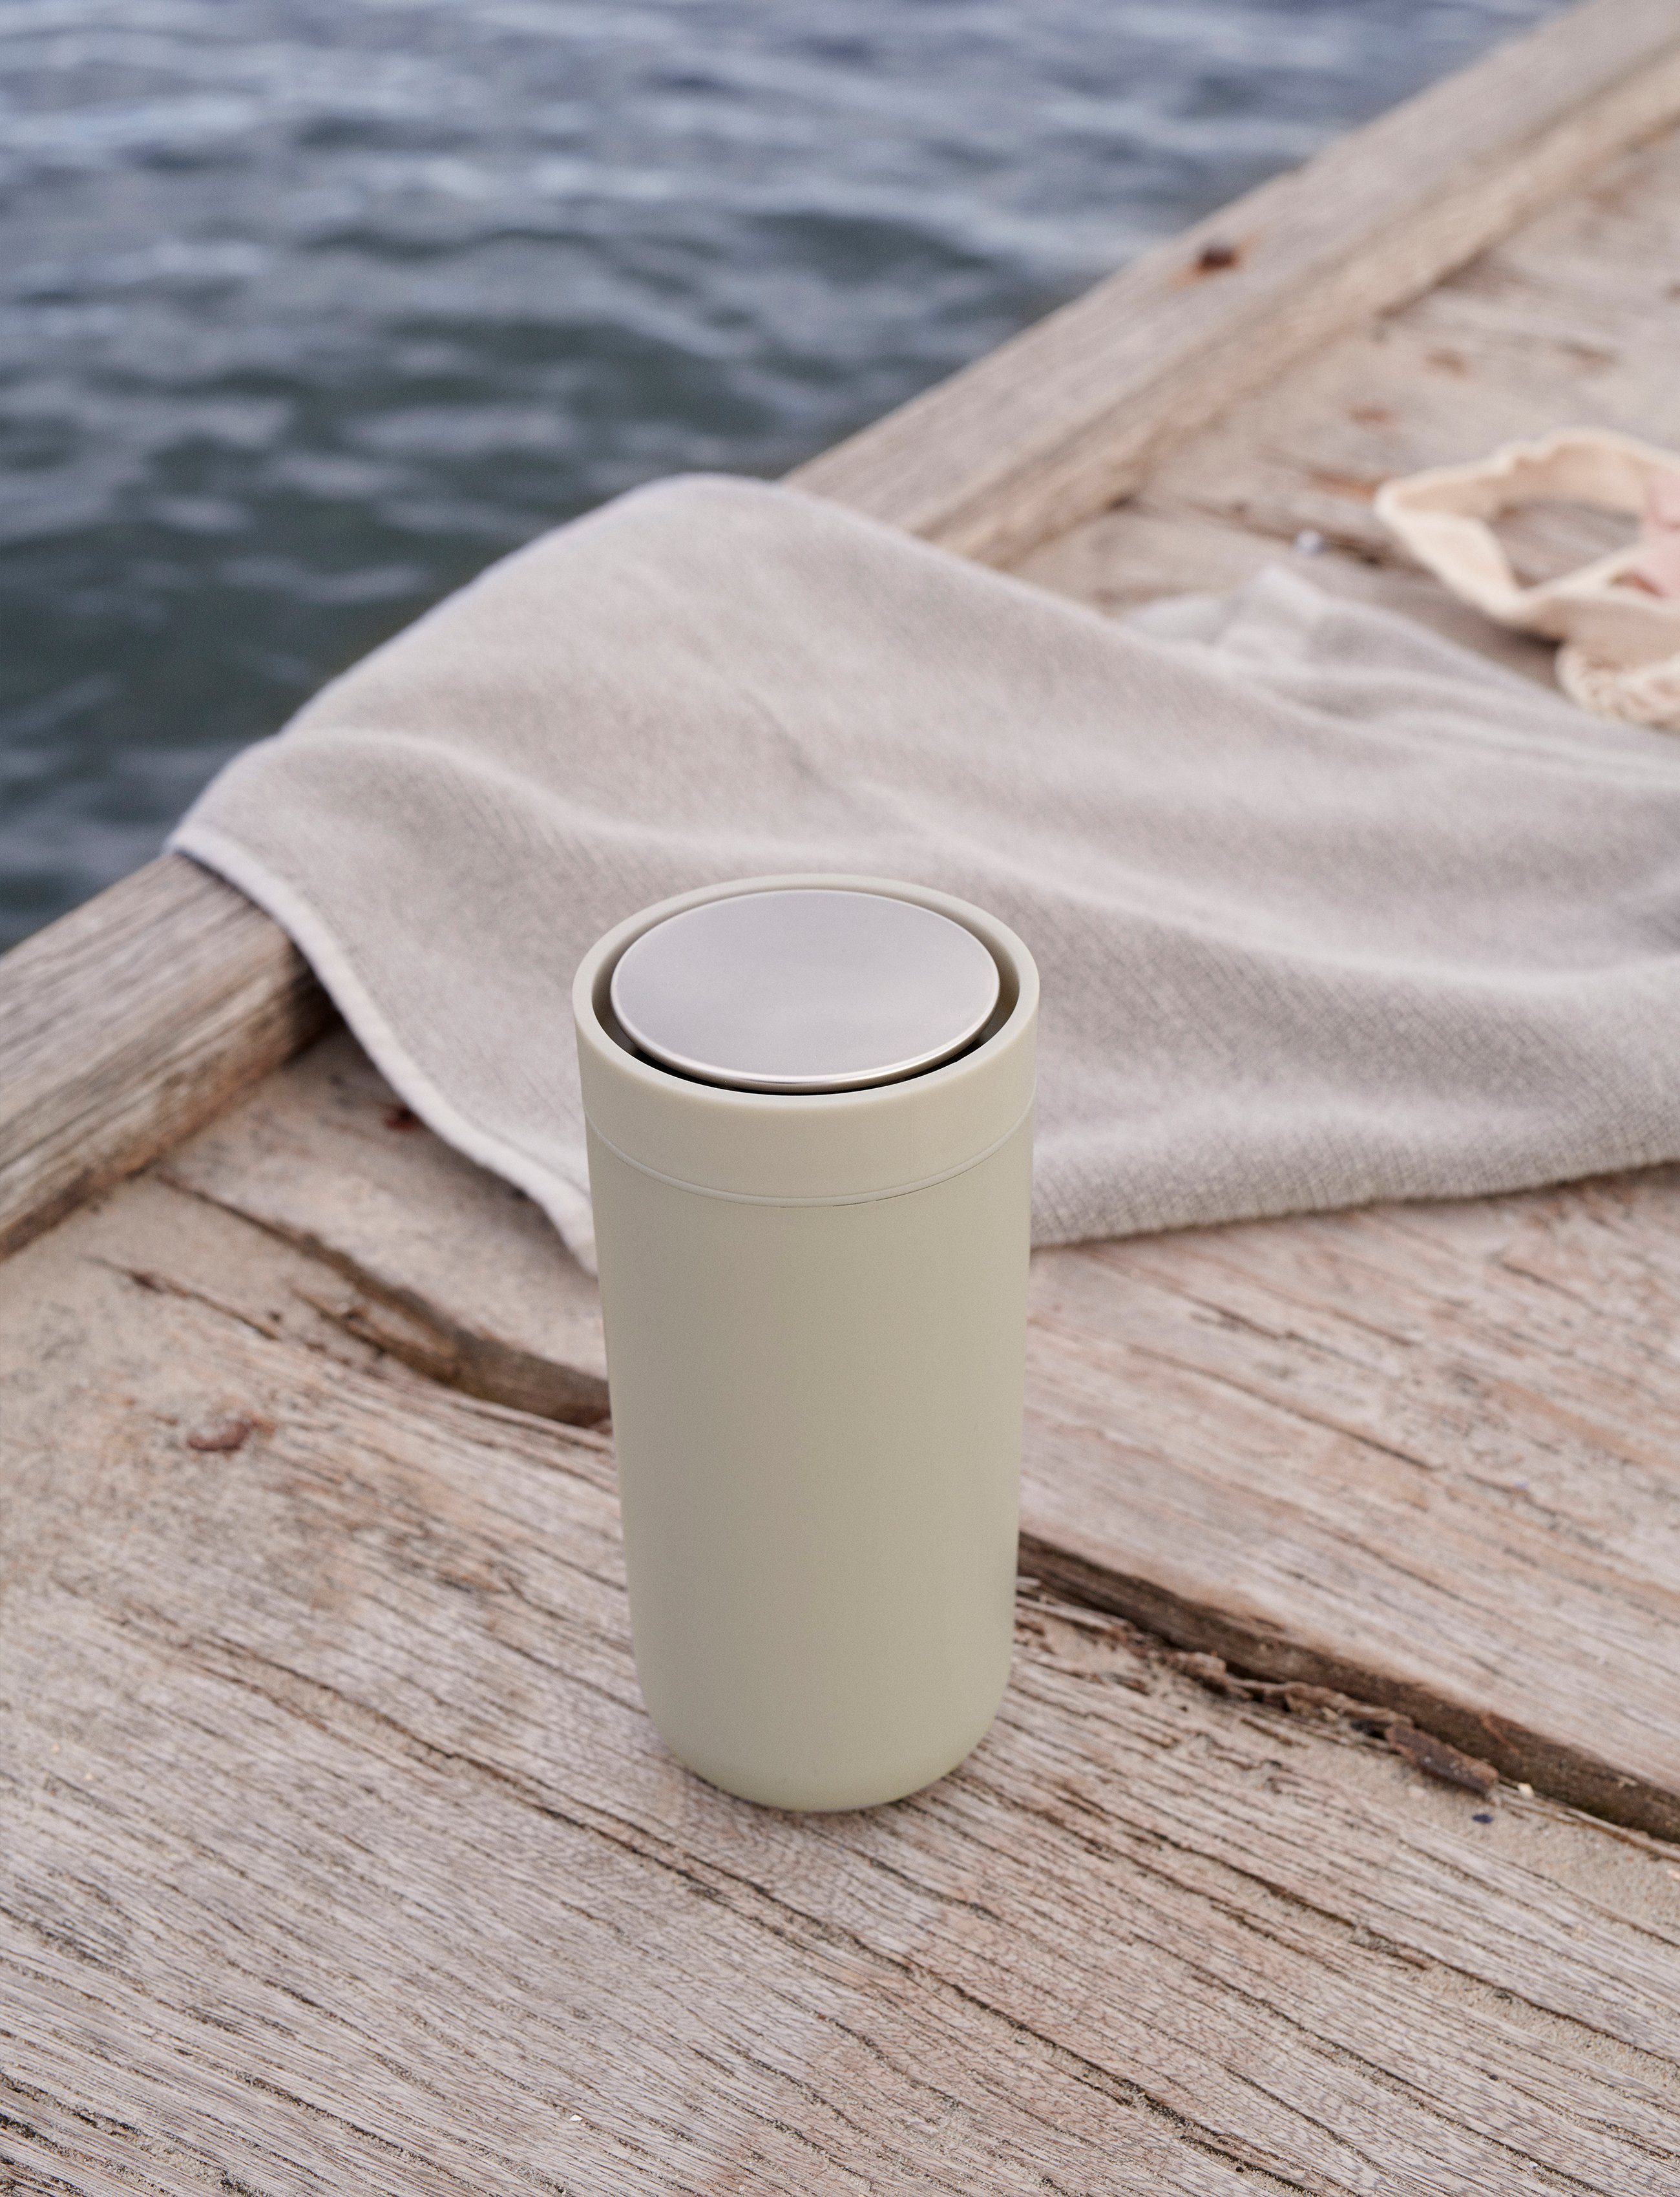 Go Thermobecher, Stelton Click Soft To Thermobecher Edelstahl Sand Stelton